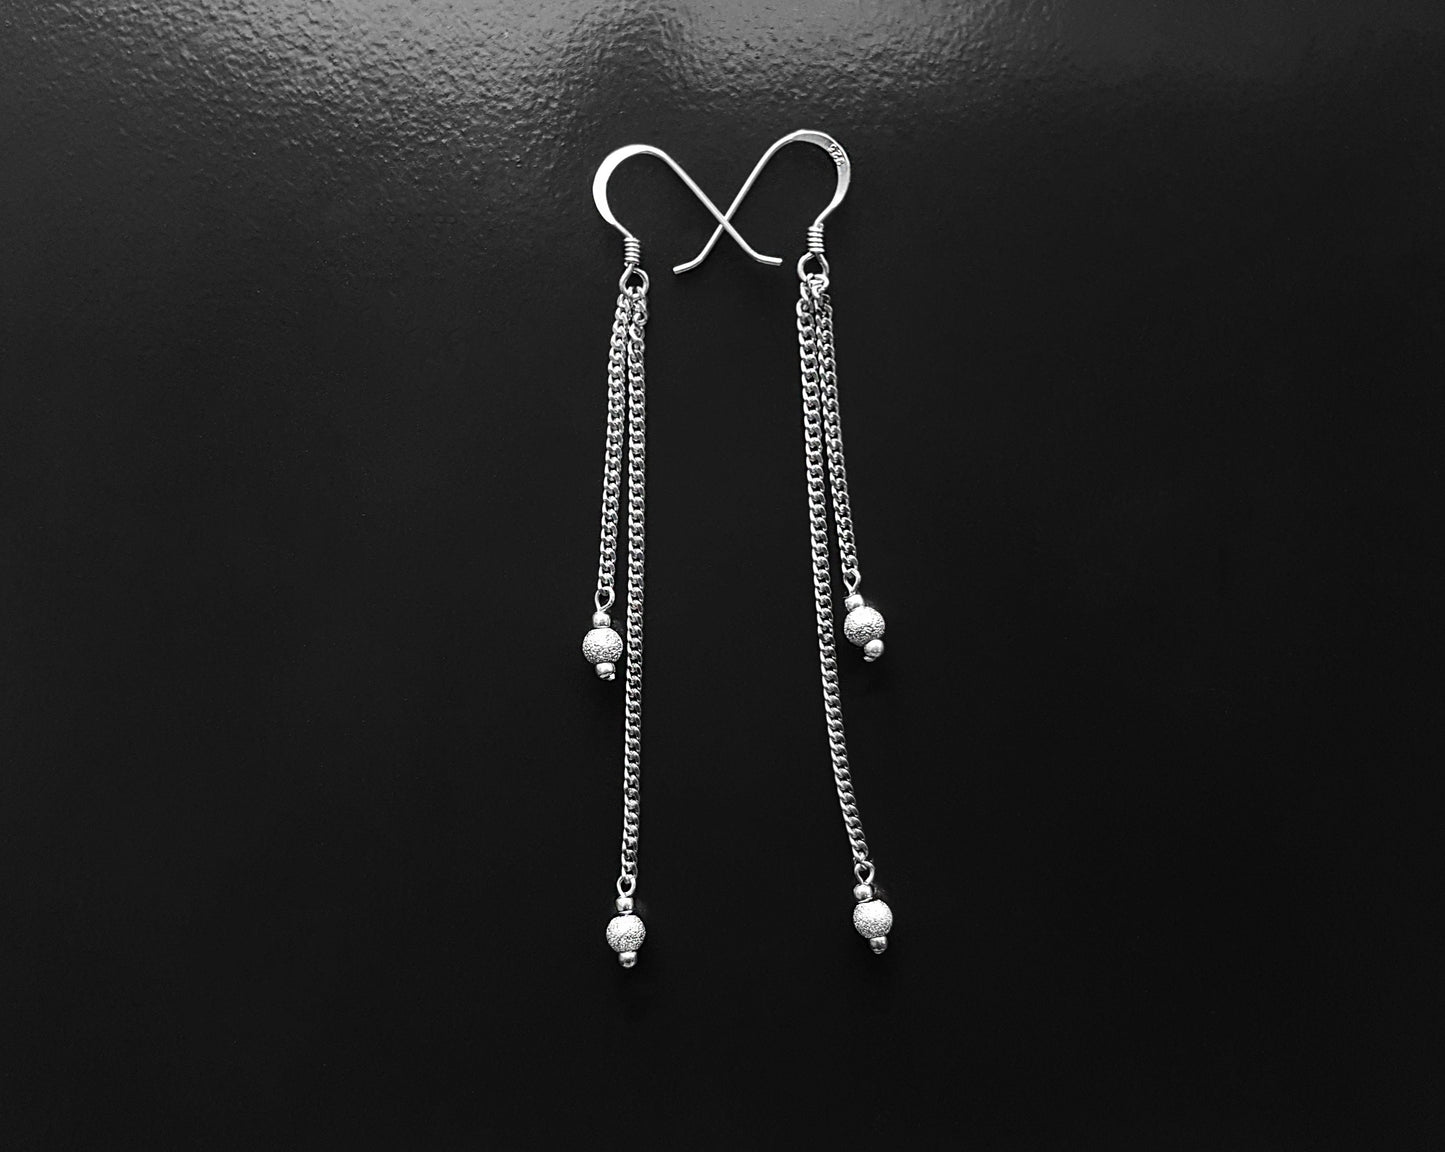 Extra Long Dangle Chain Earrings, Two long Sterling Silver chains with little sparkly balls on the base of each chain. Earrings dangle on french style earring hooks. Displayed on black background